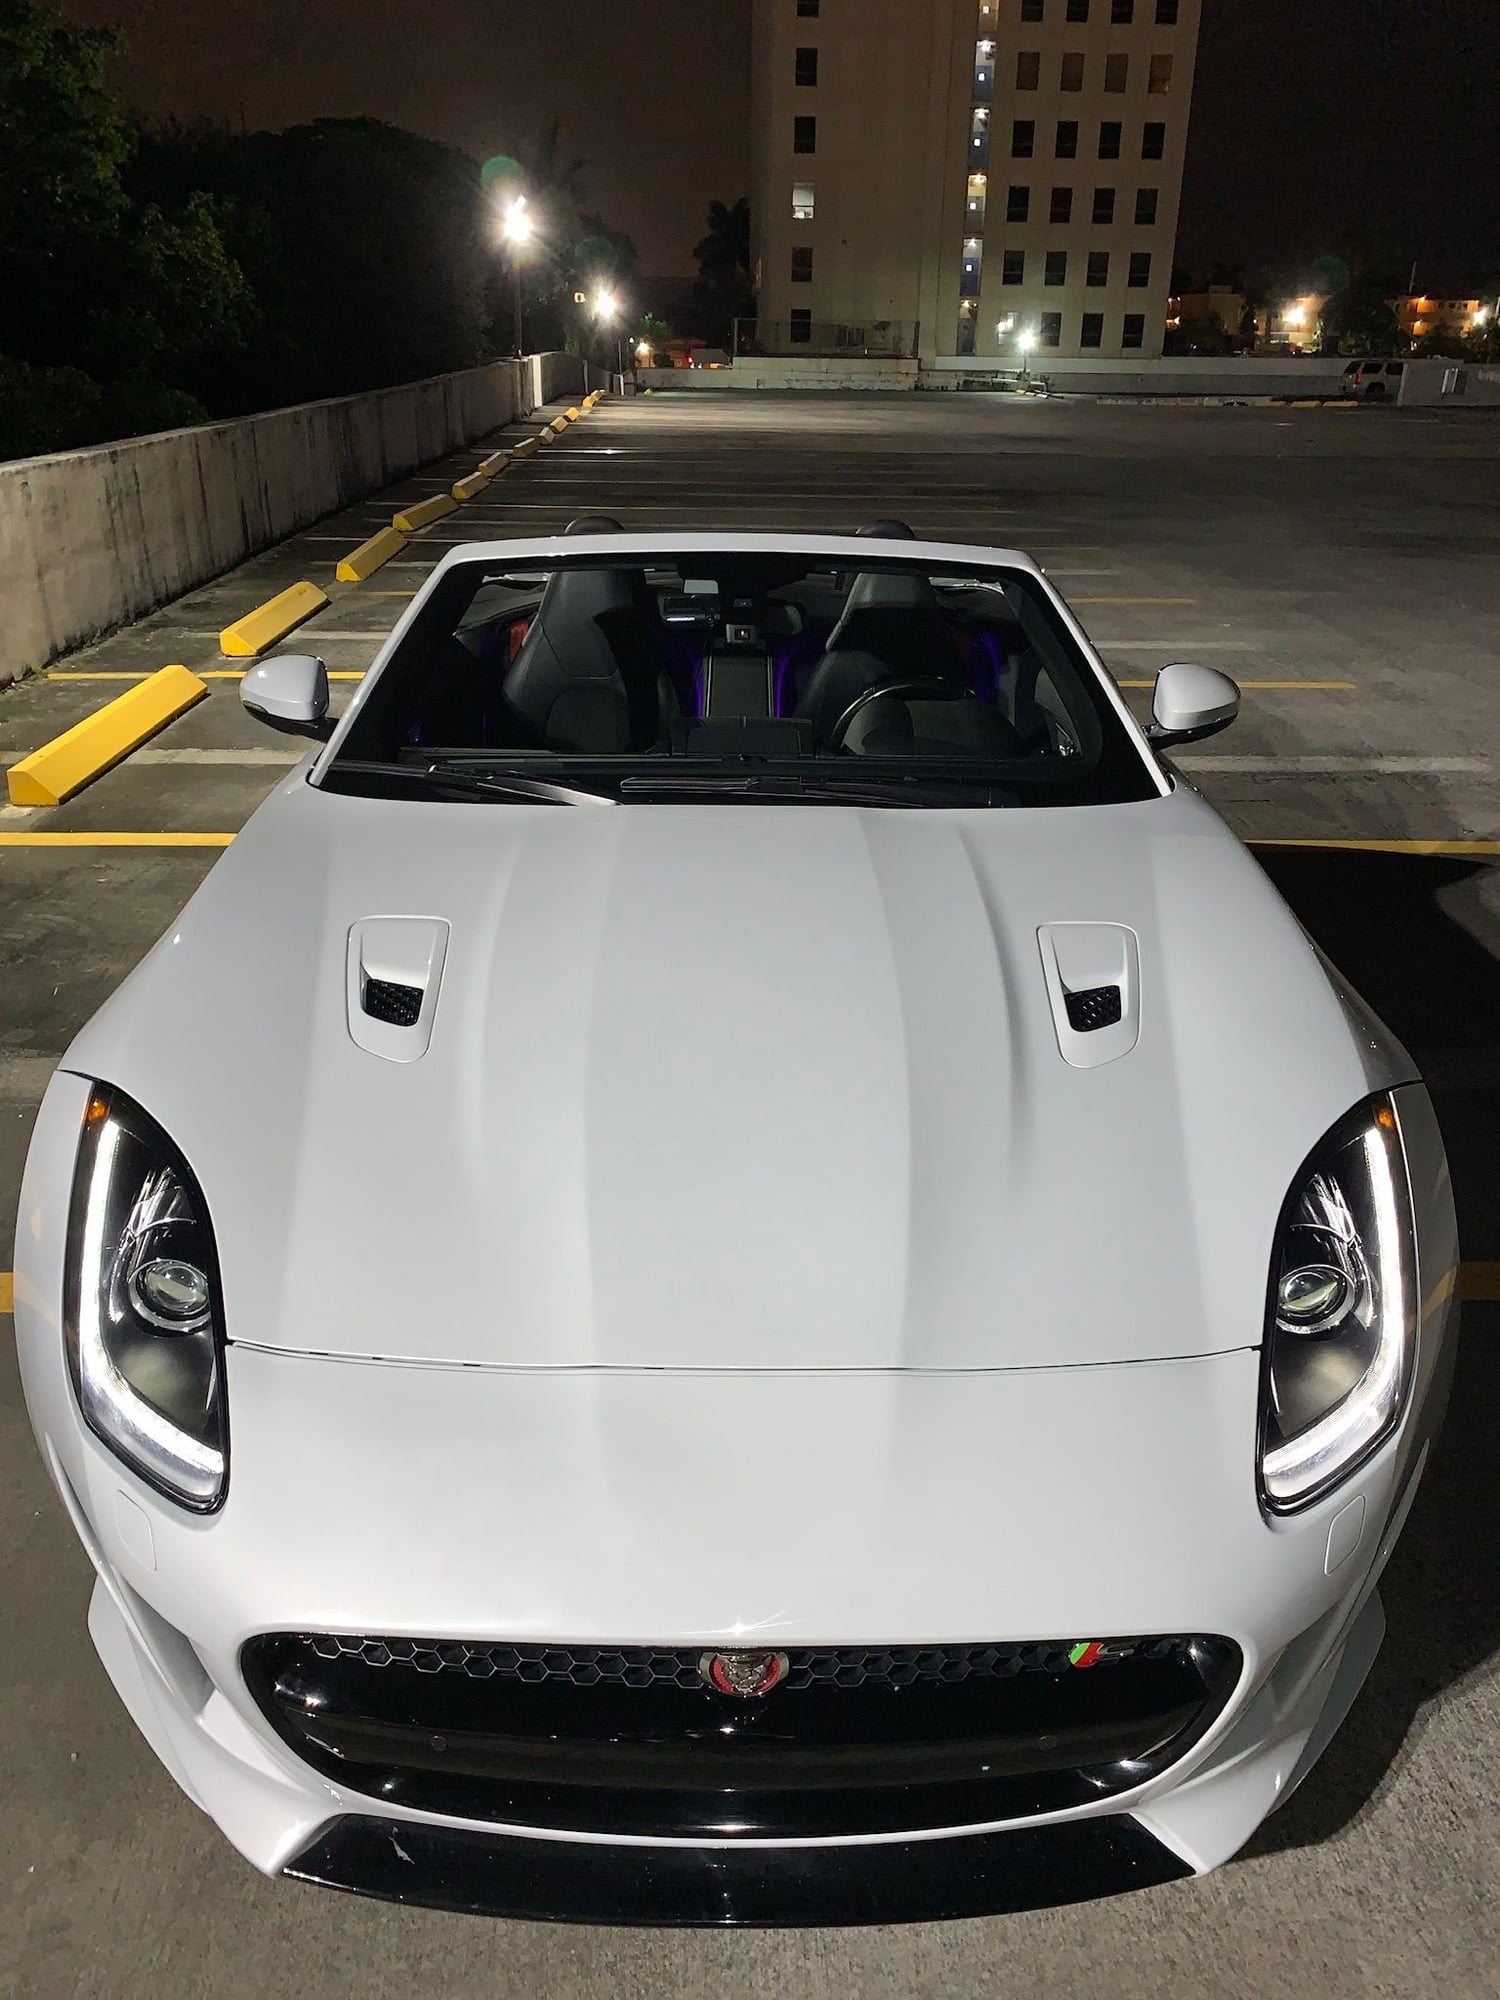 2016 Jaguar F-Type - 2016 Jaguar F-Type S AWD convertible W/3yrs Warranty - Used - VIN Sajwj6fv8g8k29696 - 28,710 Miles - 6 cyl - AWD - Automatic - Convertible - White - Hallendale, FL 33009, United States